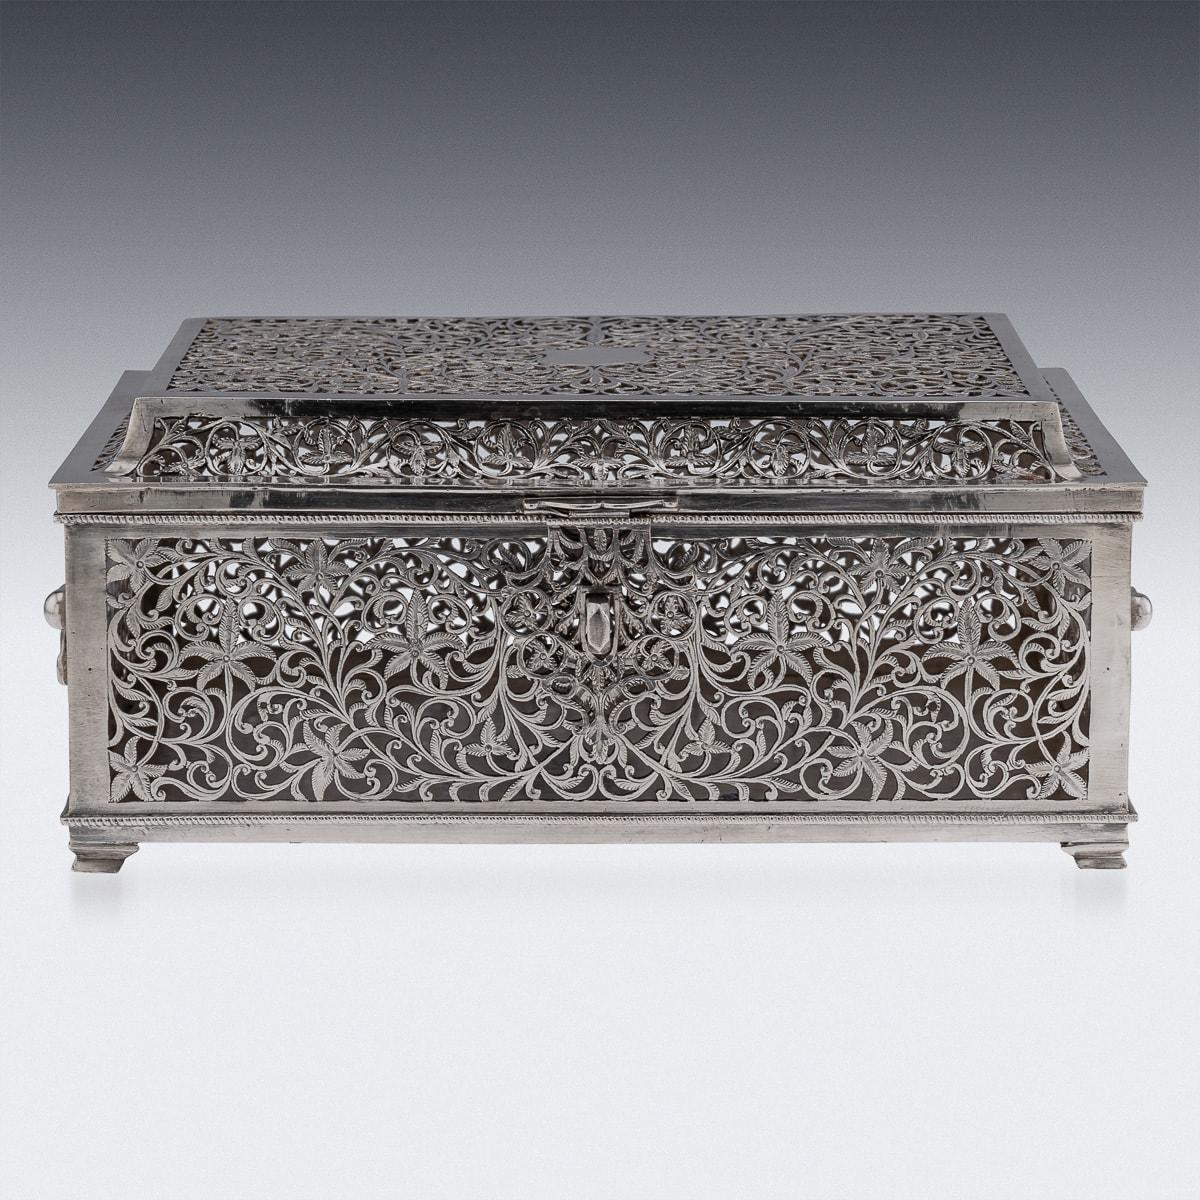 Anglo-Indian Antique 20th Century Indian Kutch Solid Silver Treasure Chest / Casket c.1900